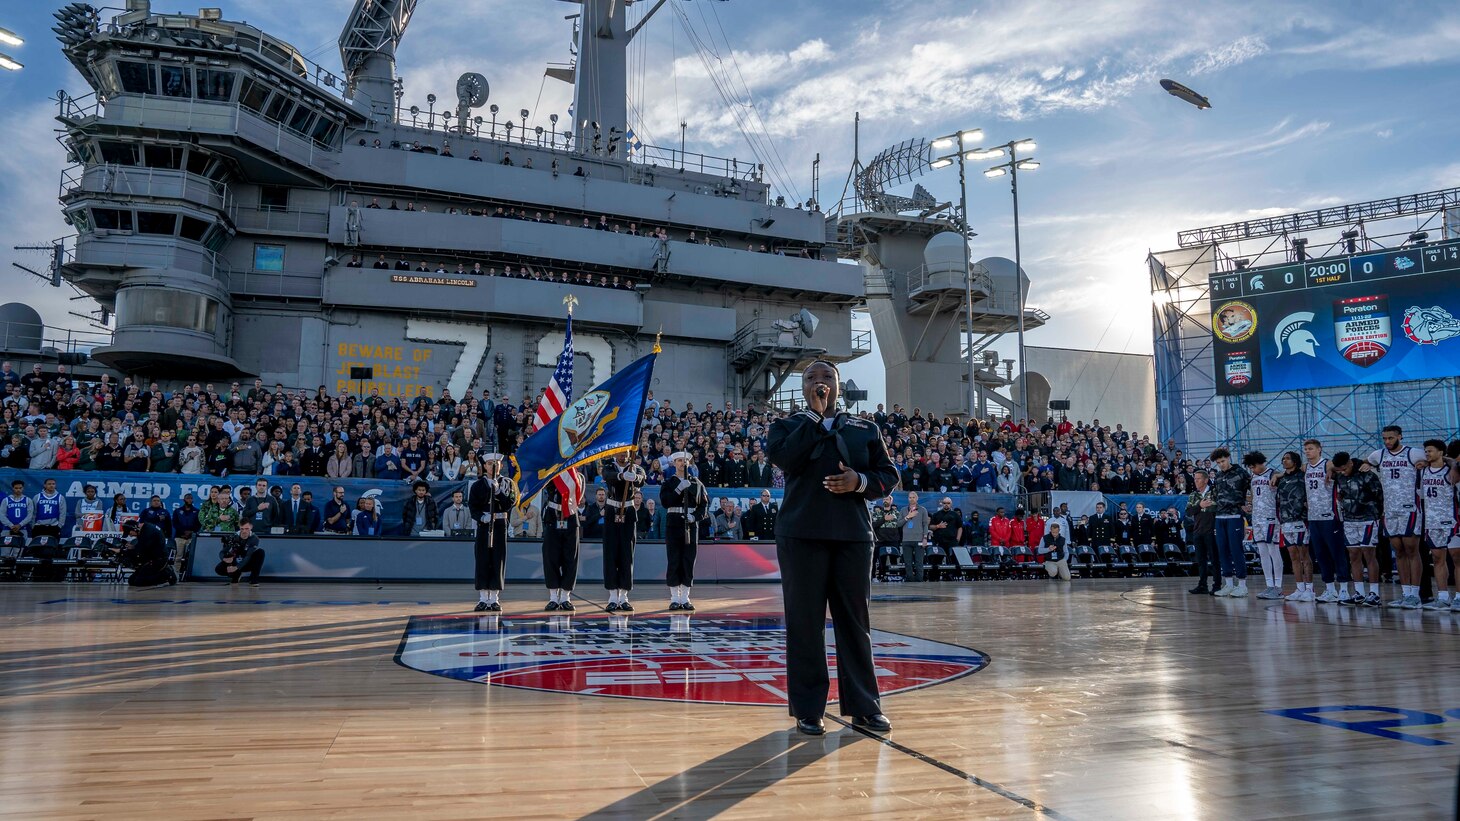 Aviation Boatswain's Mate (Equipment) 3rd Class Charitee Swift-Day sings the national anthem during the 2022 ESPN Armed Forces Classic-Carrier Edition aboard USS Abraham Lincoln (CVN 72) at Naval Air Station North Island, Calif.